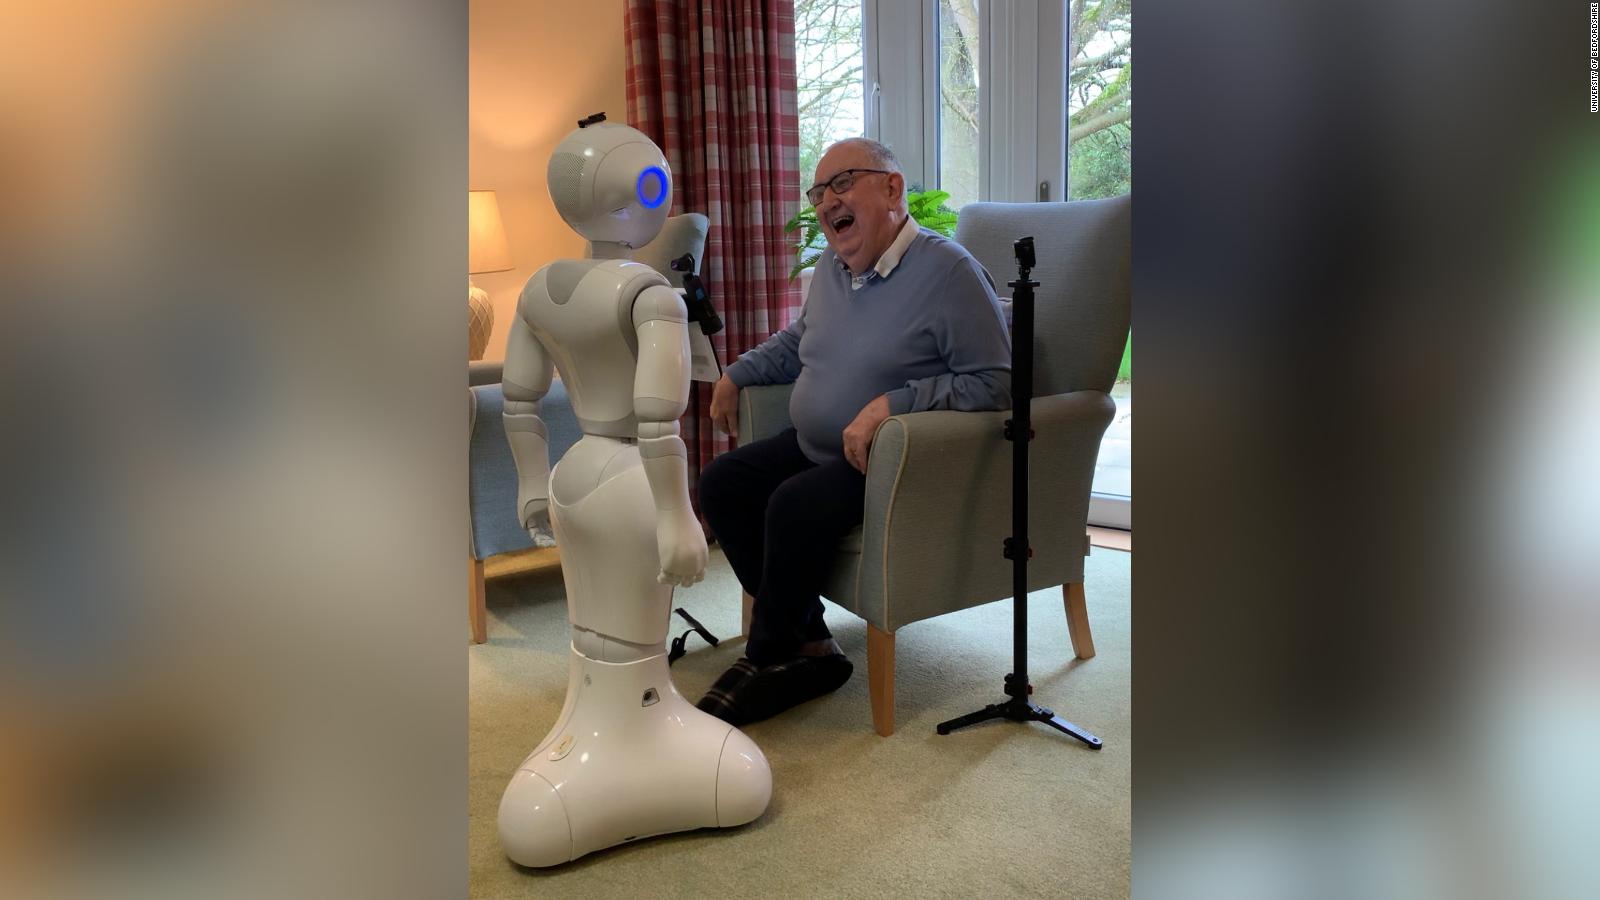 Talking Robots Could Be Used To Combat Loneliness And Boost Mental